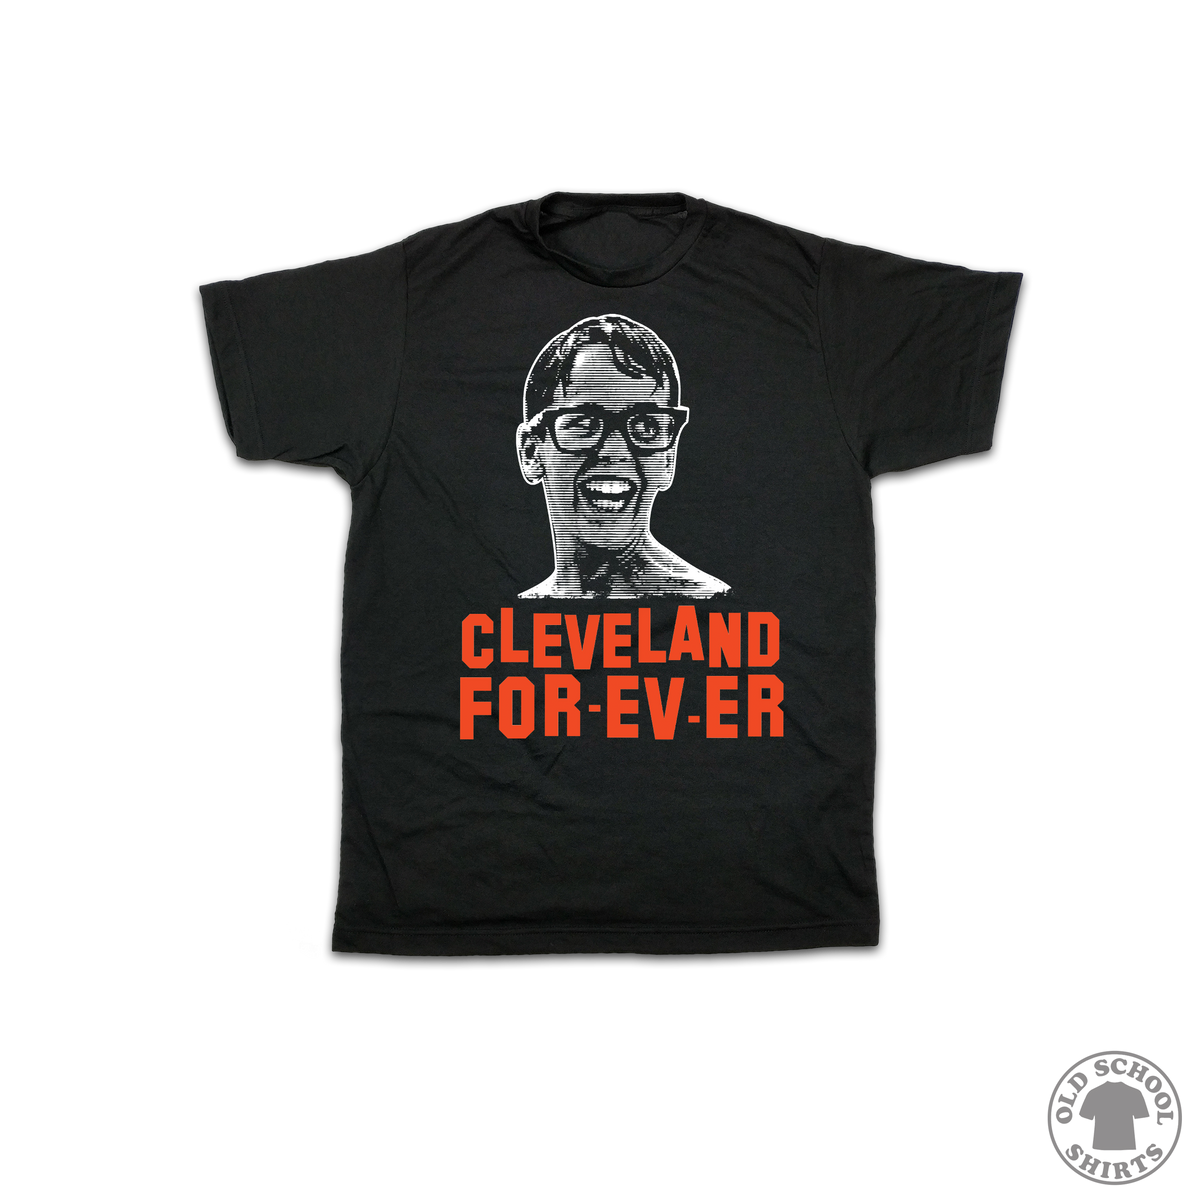 Cleveland For-Ev-Er | Youth Garments - Old School Shirts- Retro Sports T Shirts